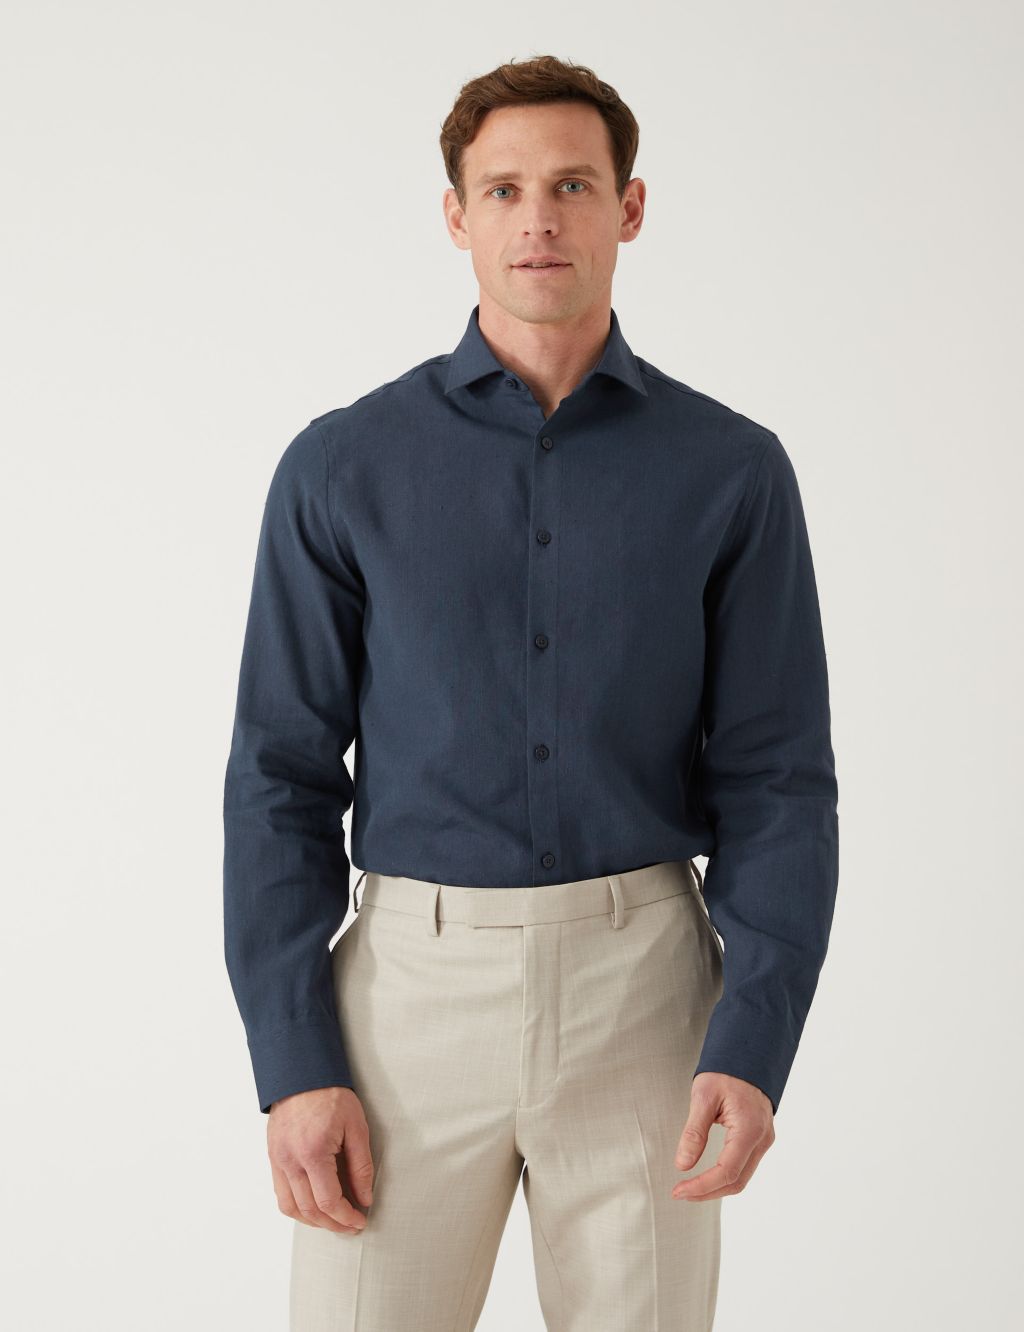 Tailored Fit Italian Linen Miracle™ Shirt image 1